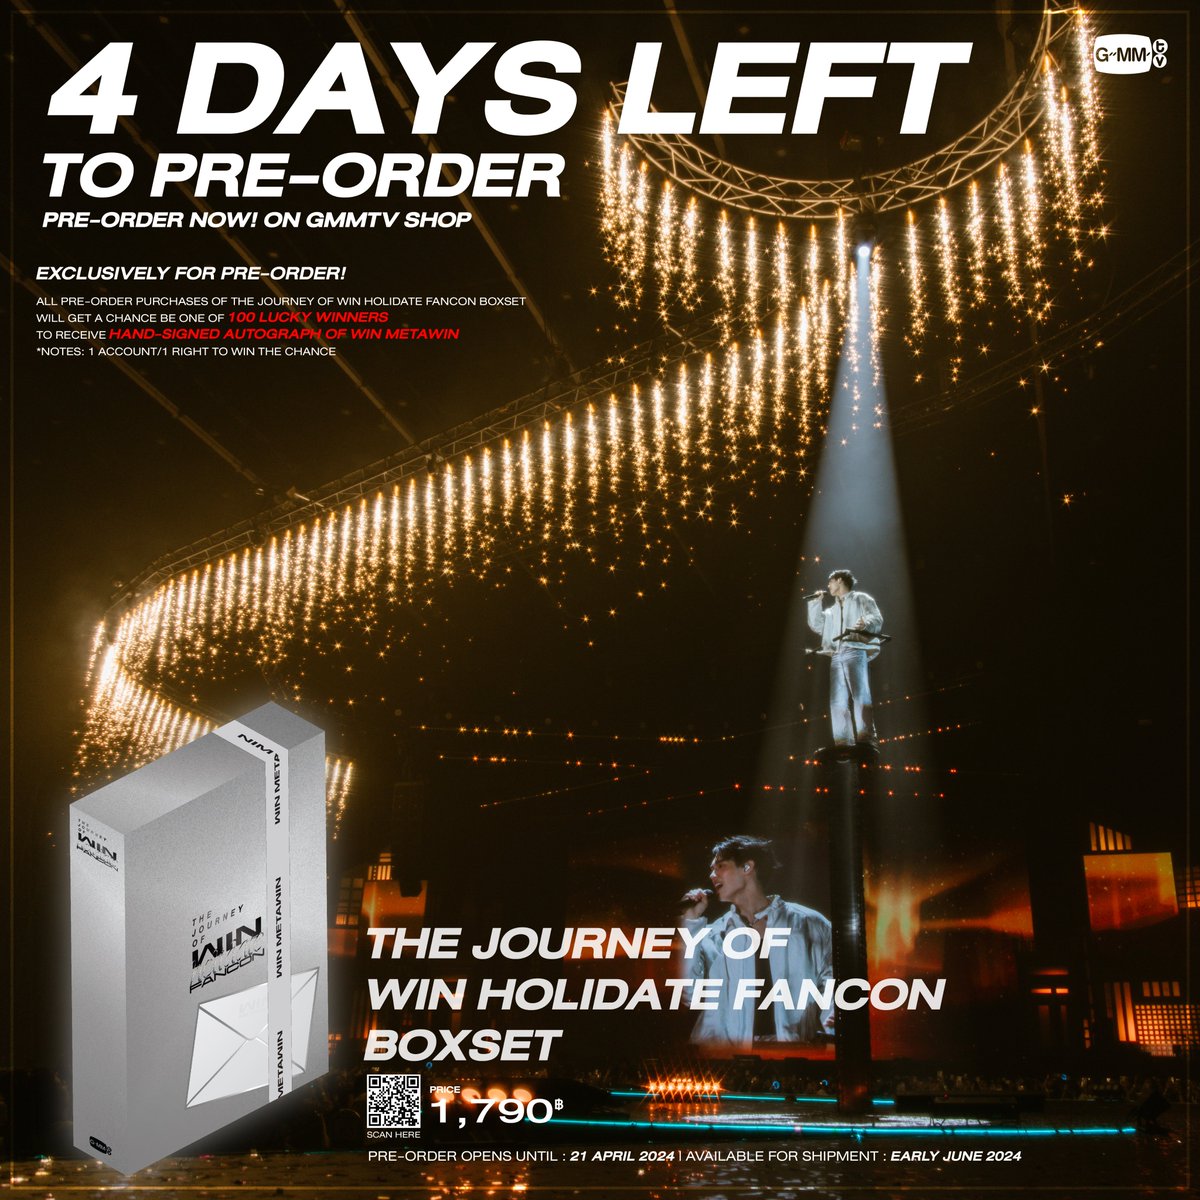 Only 4 days left! If you haven’t preordered THE JOURNEY OF WIN HOLIDATE FANCON BOXSET, it’s time to do so now. gmm-tv.com/shop/the-journ… #WinHolidateFancon #winmetawin #GMMTV. .